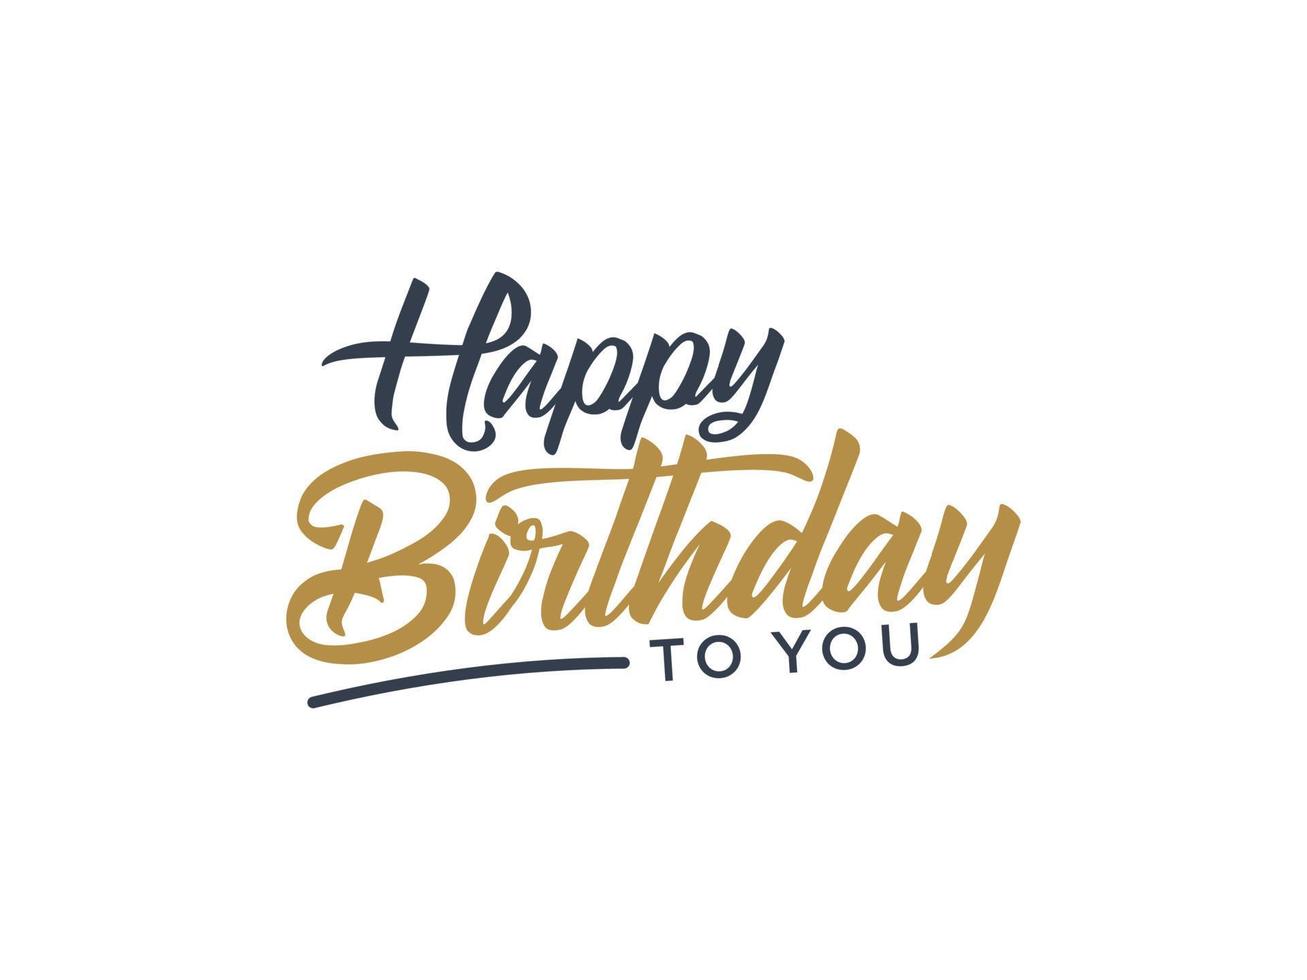 Happy Birthday Card. Black Gold Text Hand Drawn Lettering Brush Calligraphy Style with Square Line Frame outside isolated on White Background. Flat Vector Illustration for Greeting Cards